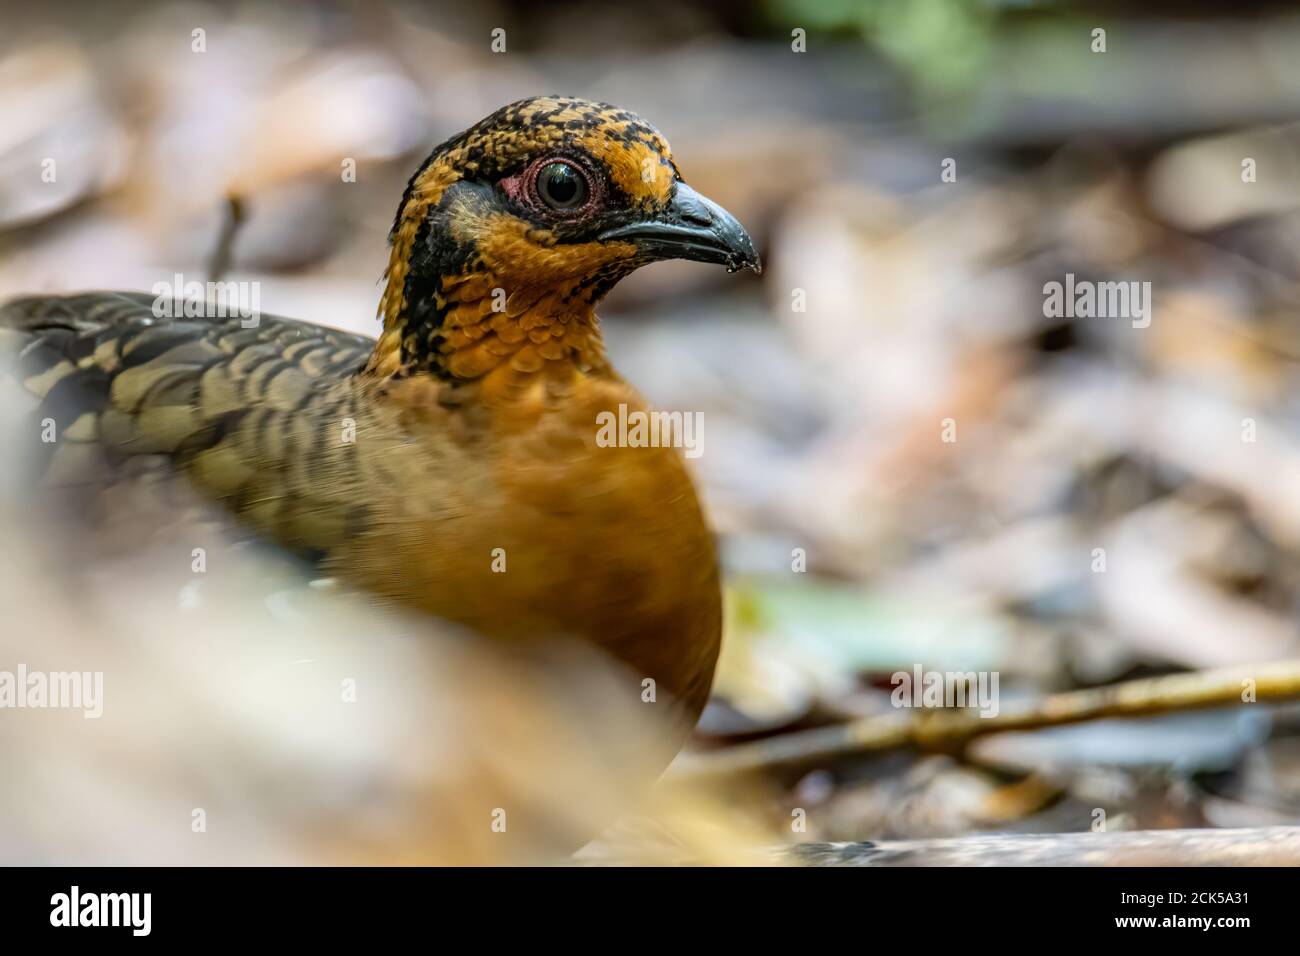 Nature wildlife image of bird red-breasted partridge also known as the Bornean hill-partridge It is endemic to hill and montane forest in Borneo Stock Photo